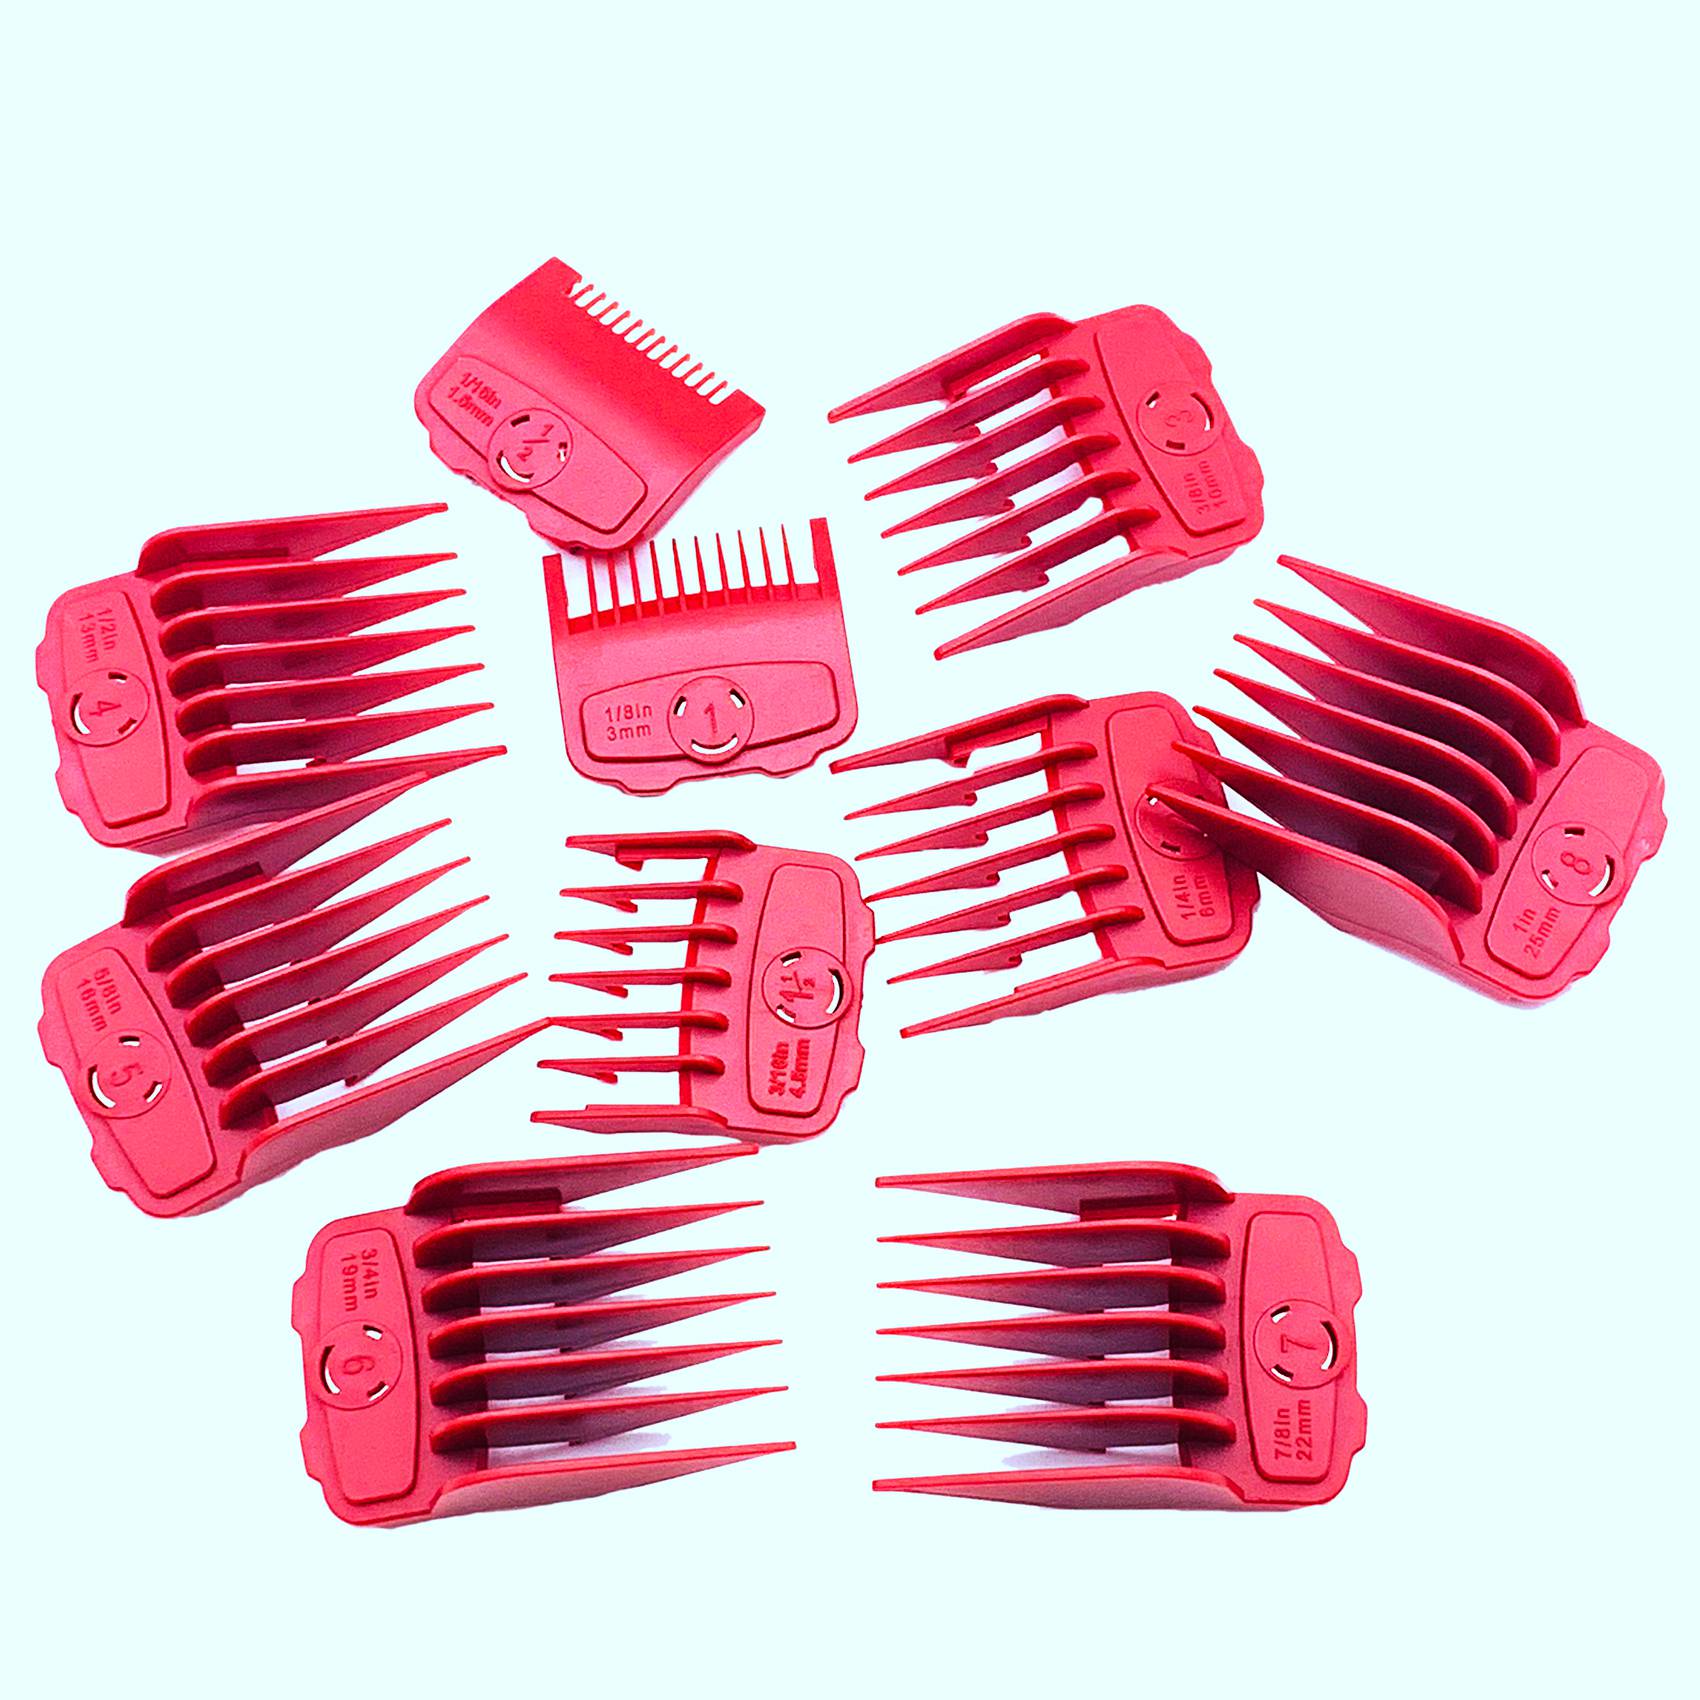 pink clipper guards